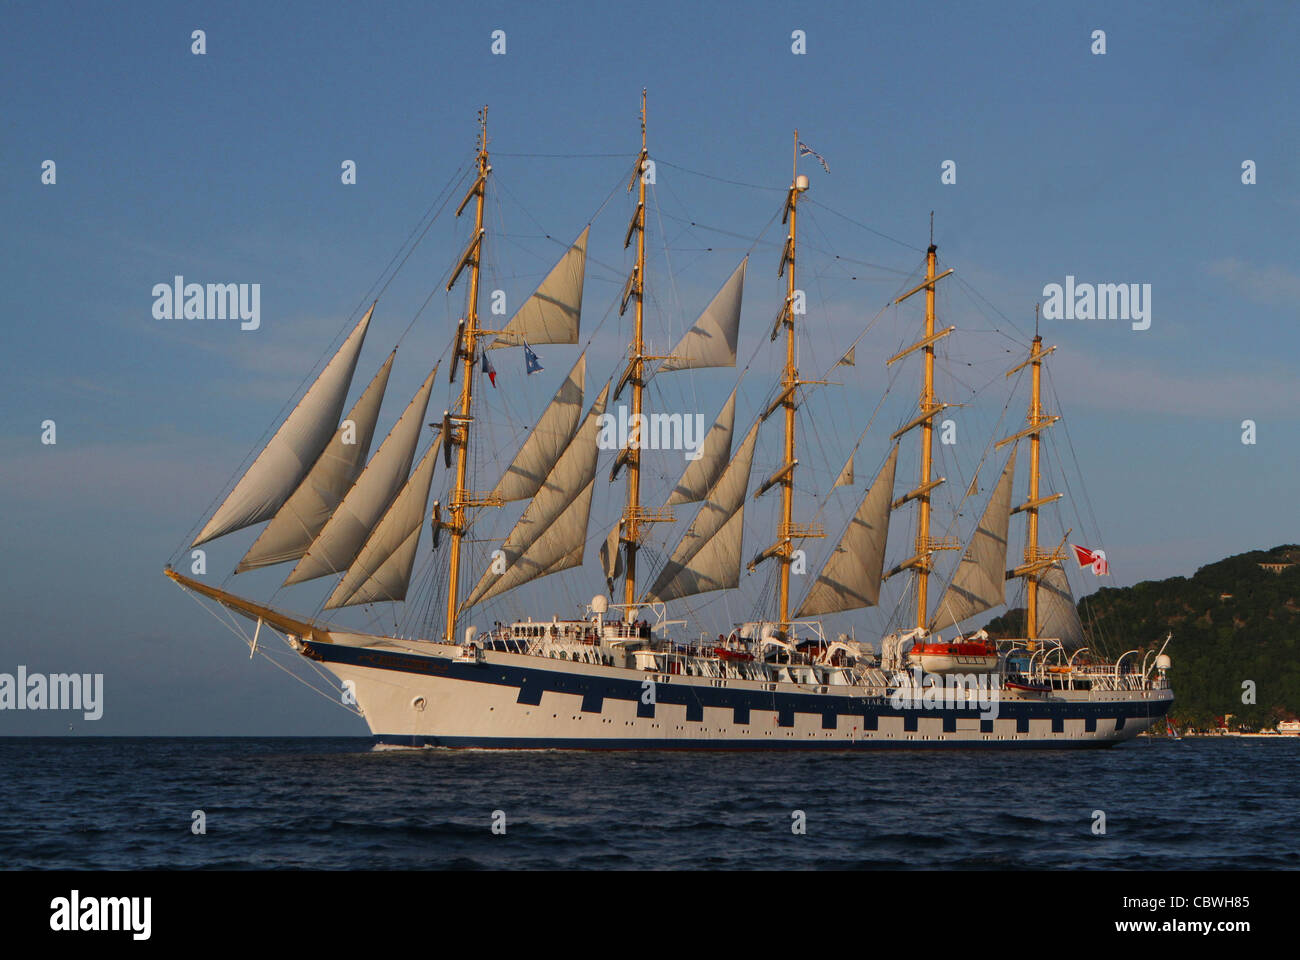 Star Clipper's Square Rigged ship 'Royal Clipper' under full sail off The Saintes in the West Indies Stock Photo